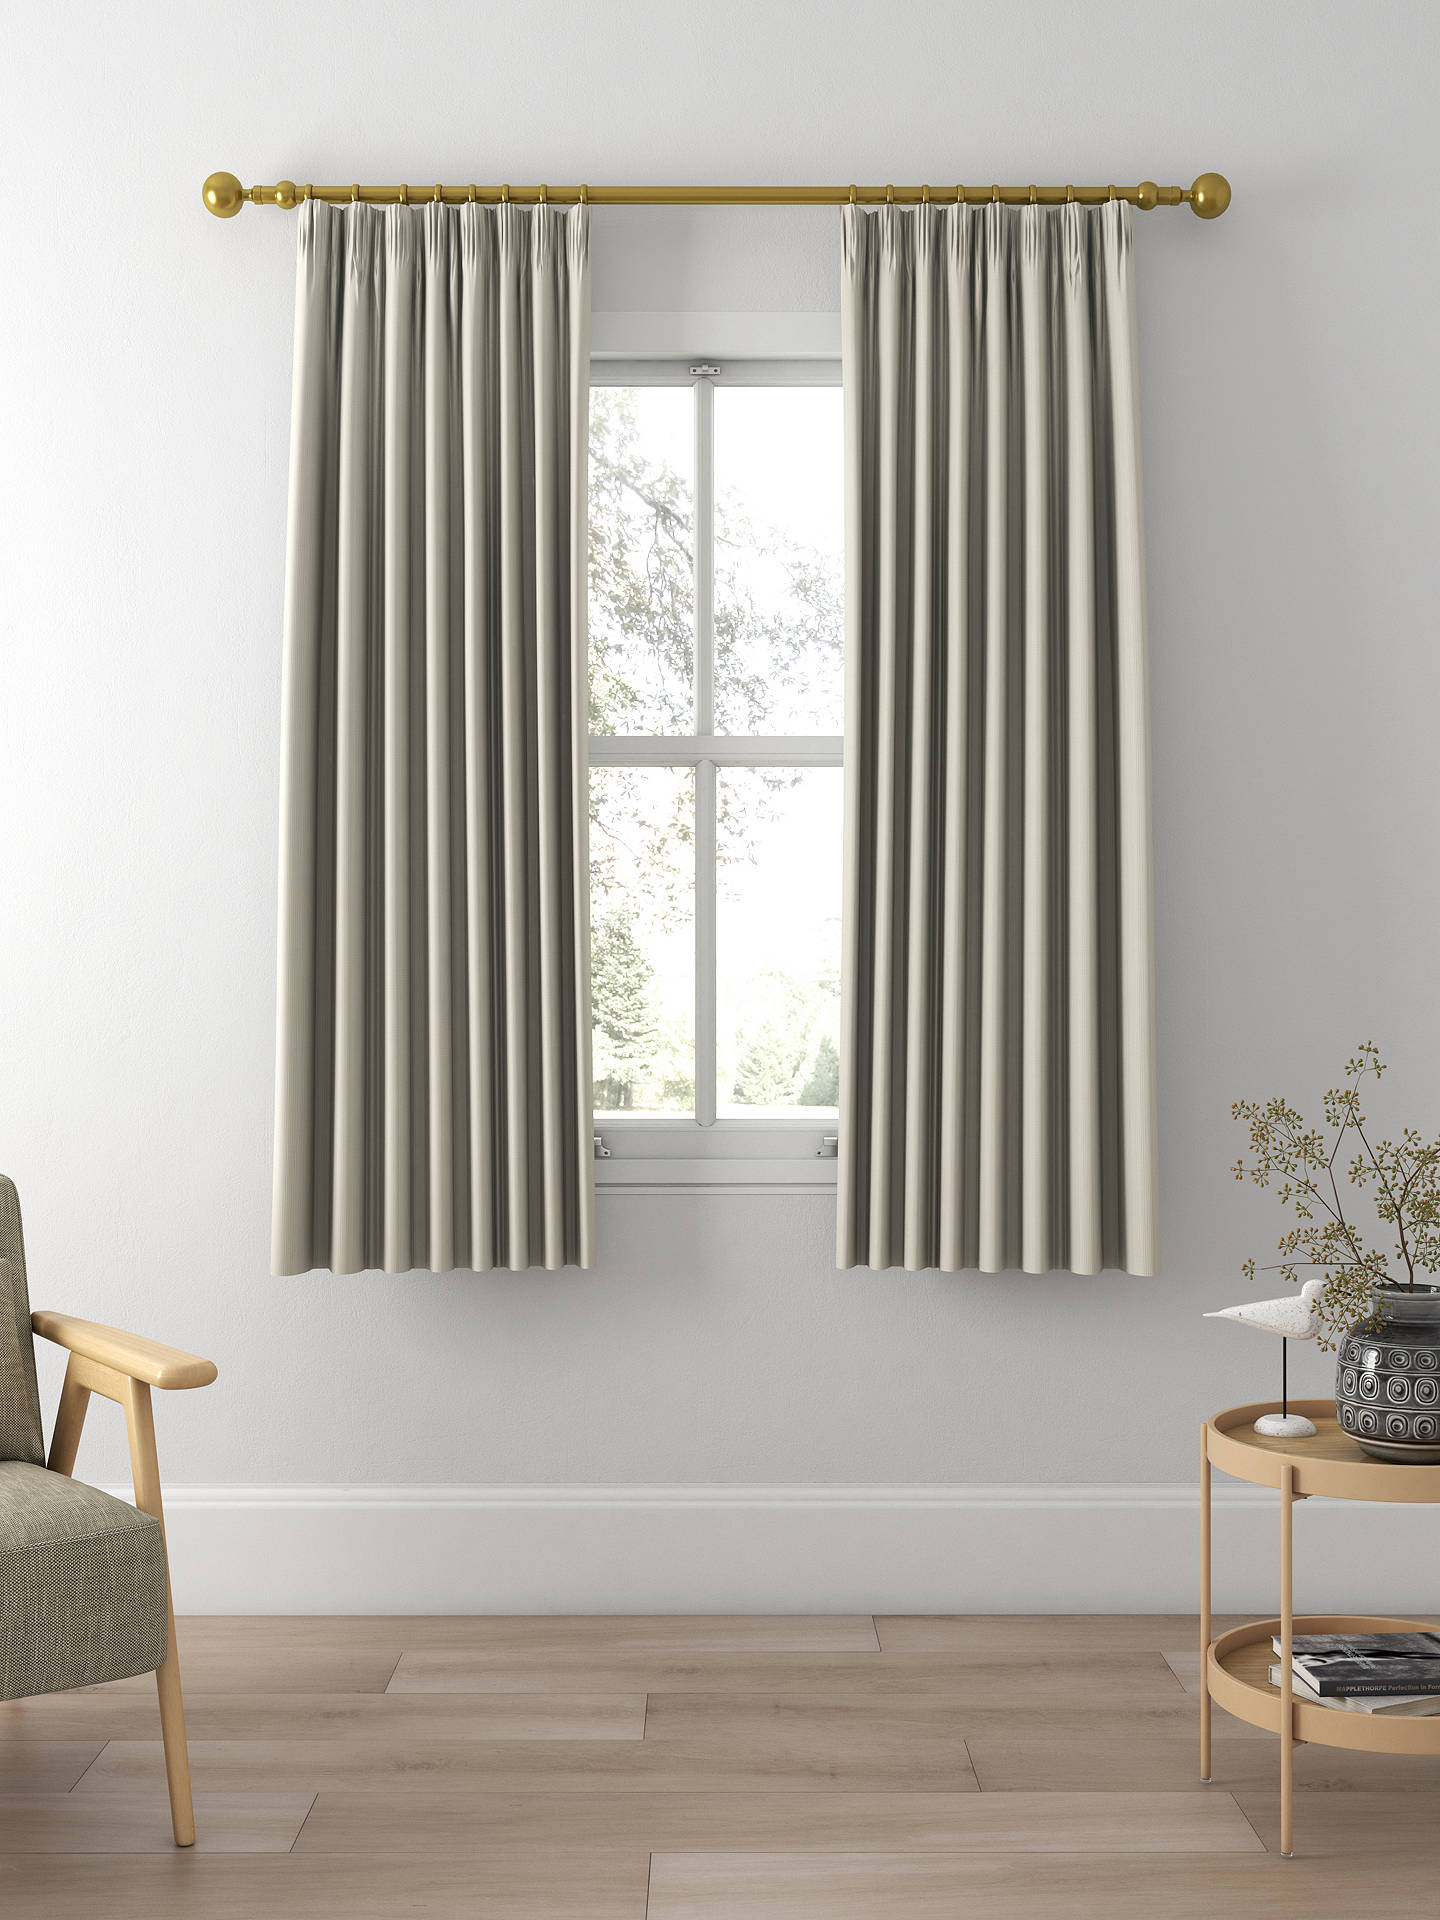 Scion Concentric Furnishing Made to Measure Curtains, Wildflower